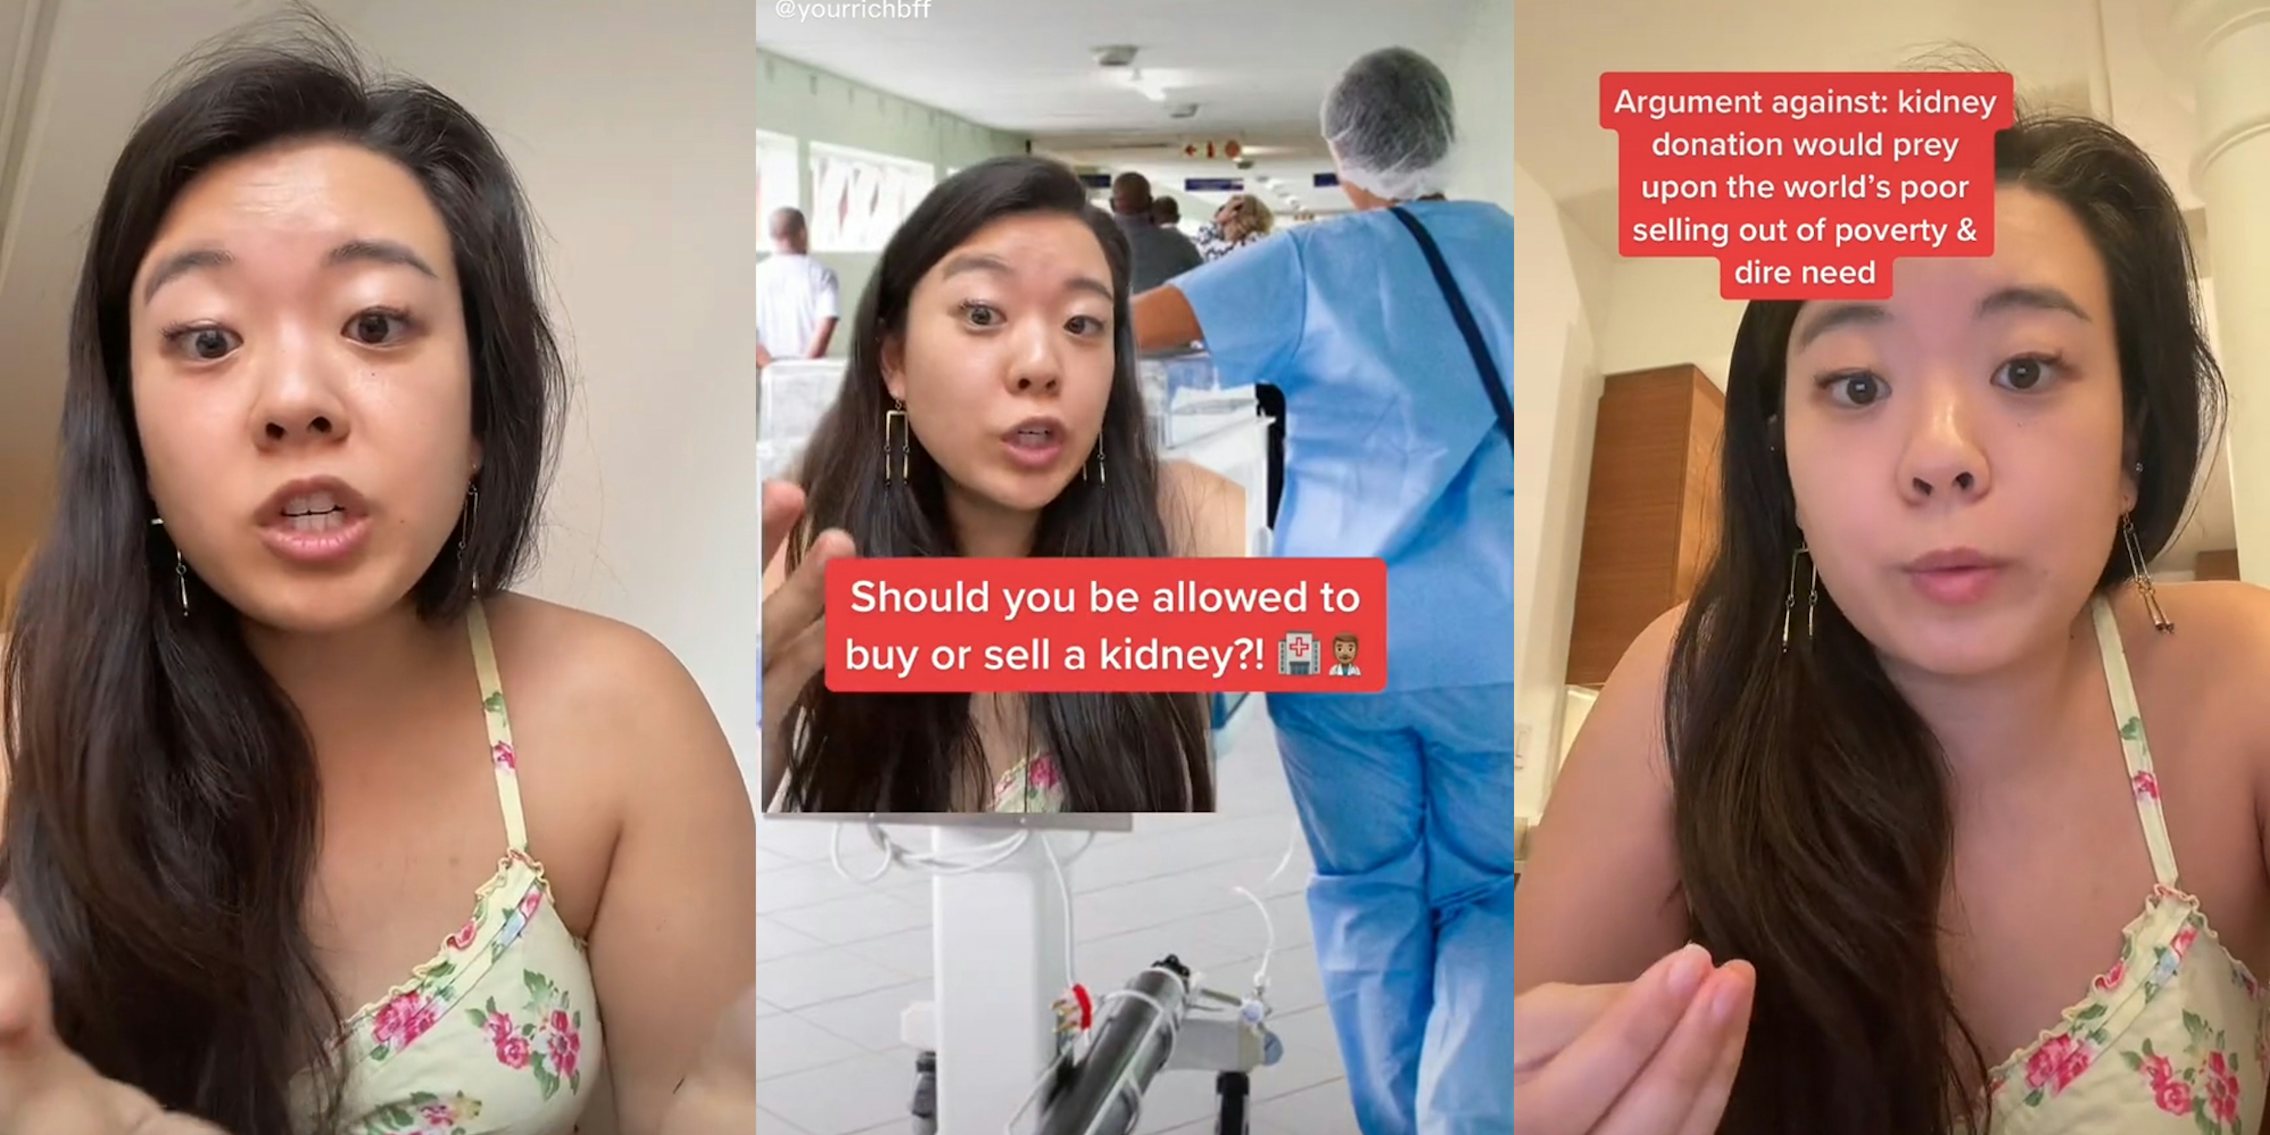 young woman with captions 'should you be allowed to buy or sell a kidney?!' and 'argument against: kidney donation would prey upon the world's poor selling out of poverty & dire need'